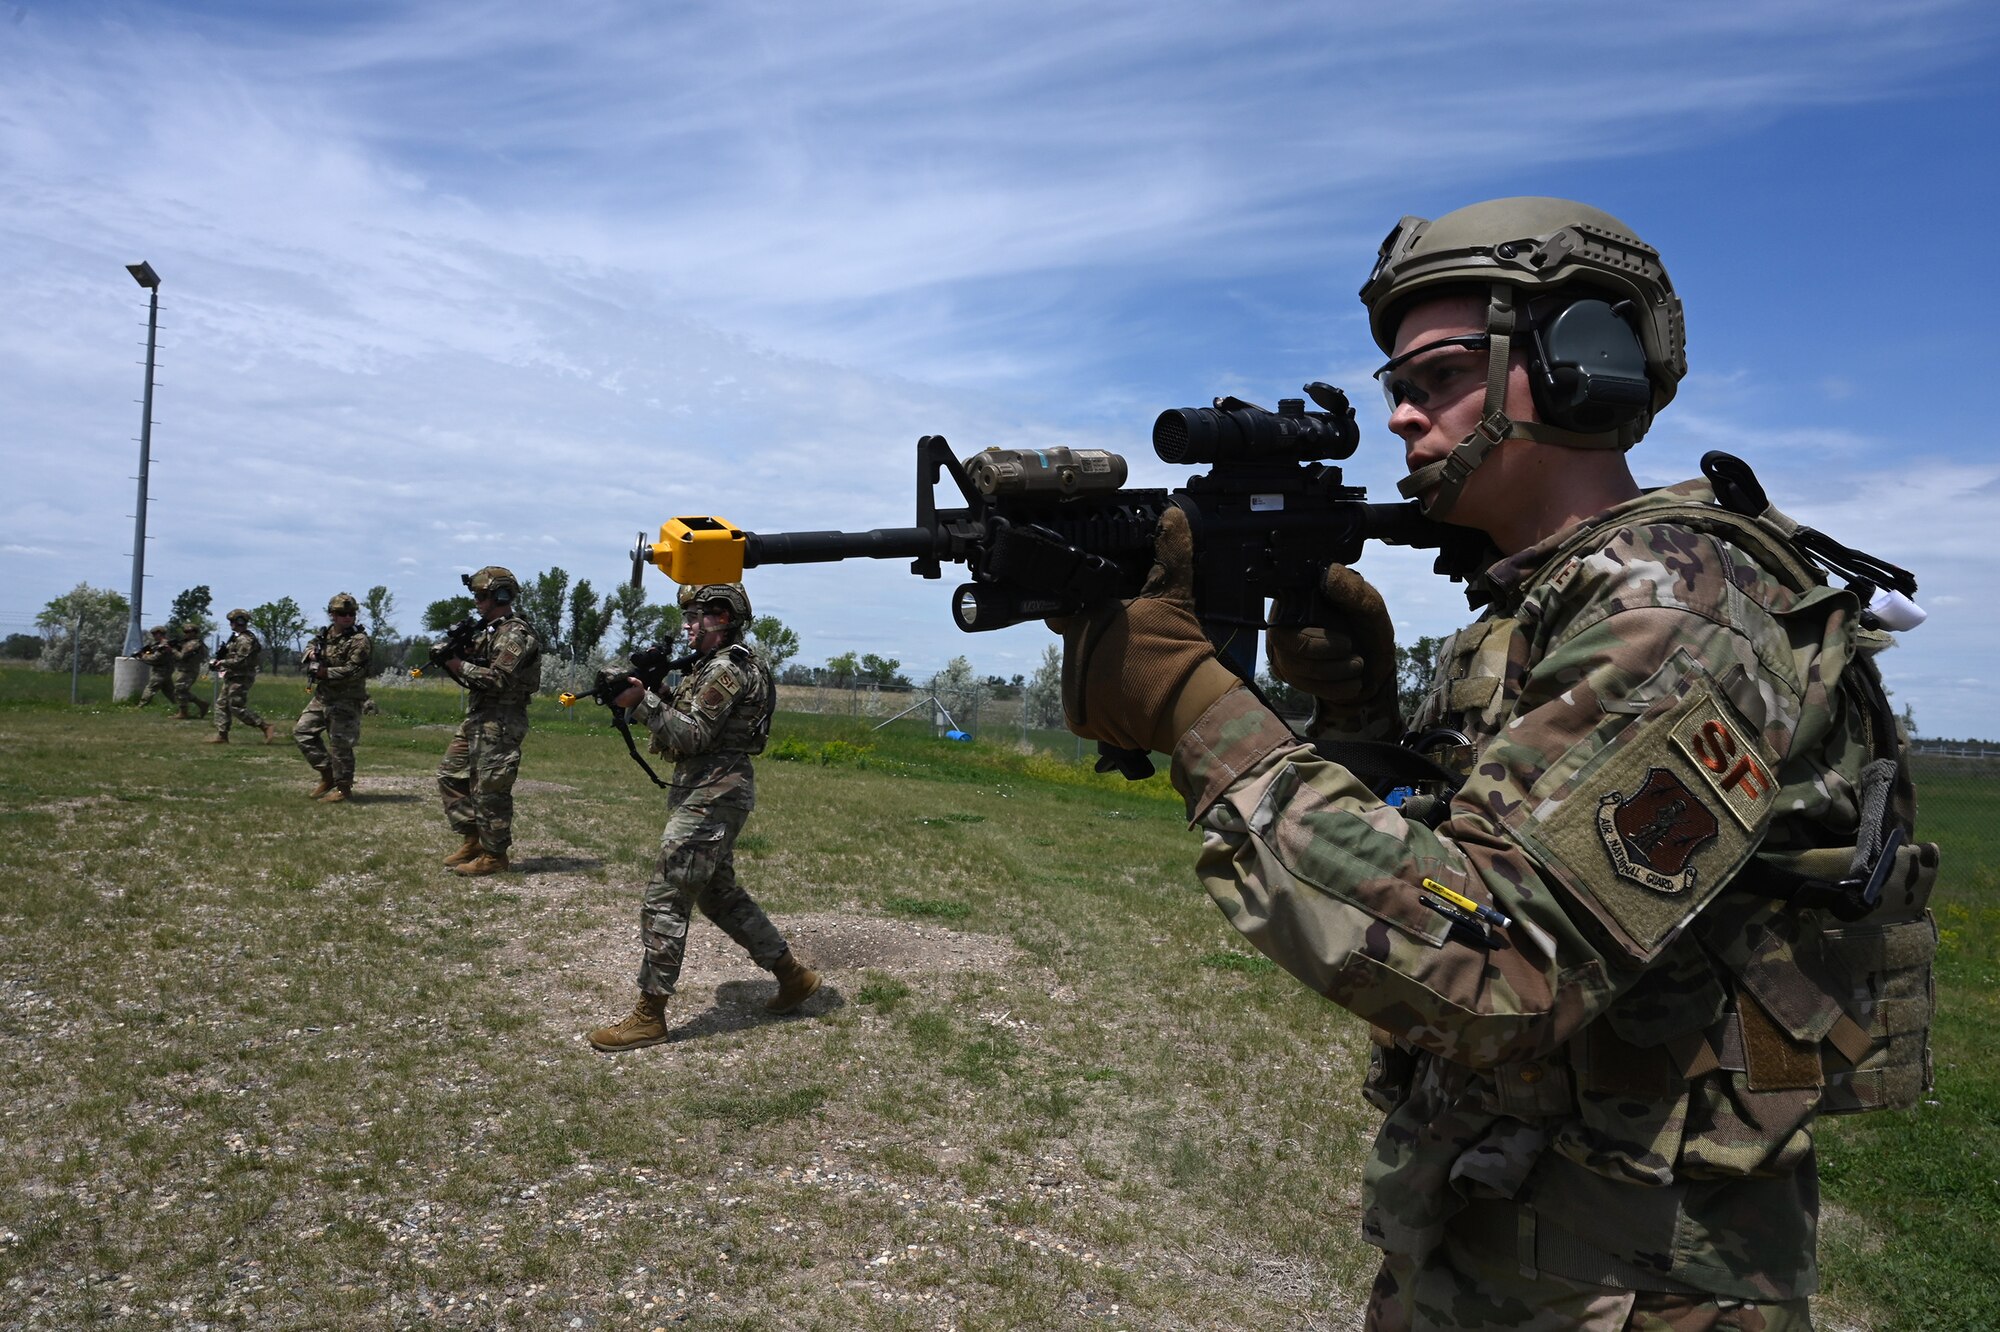 Seven members of the 219th Security Forces Squadron 219th Security Forces Squadron walk spread out in a line as they point M4 rifles ahead of them during a training exercise on a training missile launch facility at the Minot Air Force Base, N.D., June 24, 2021.